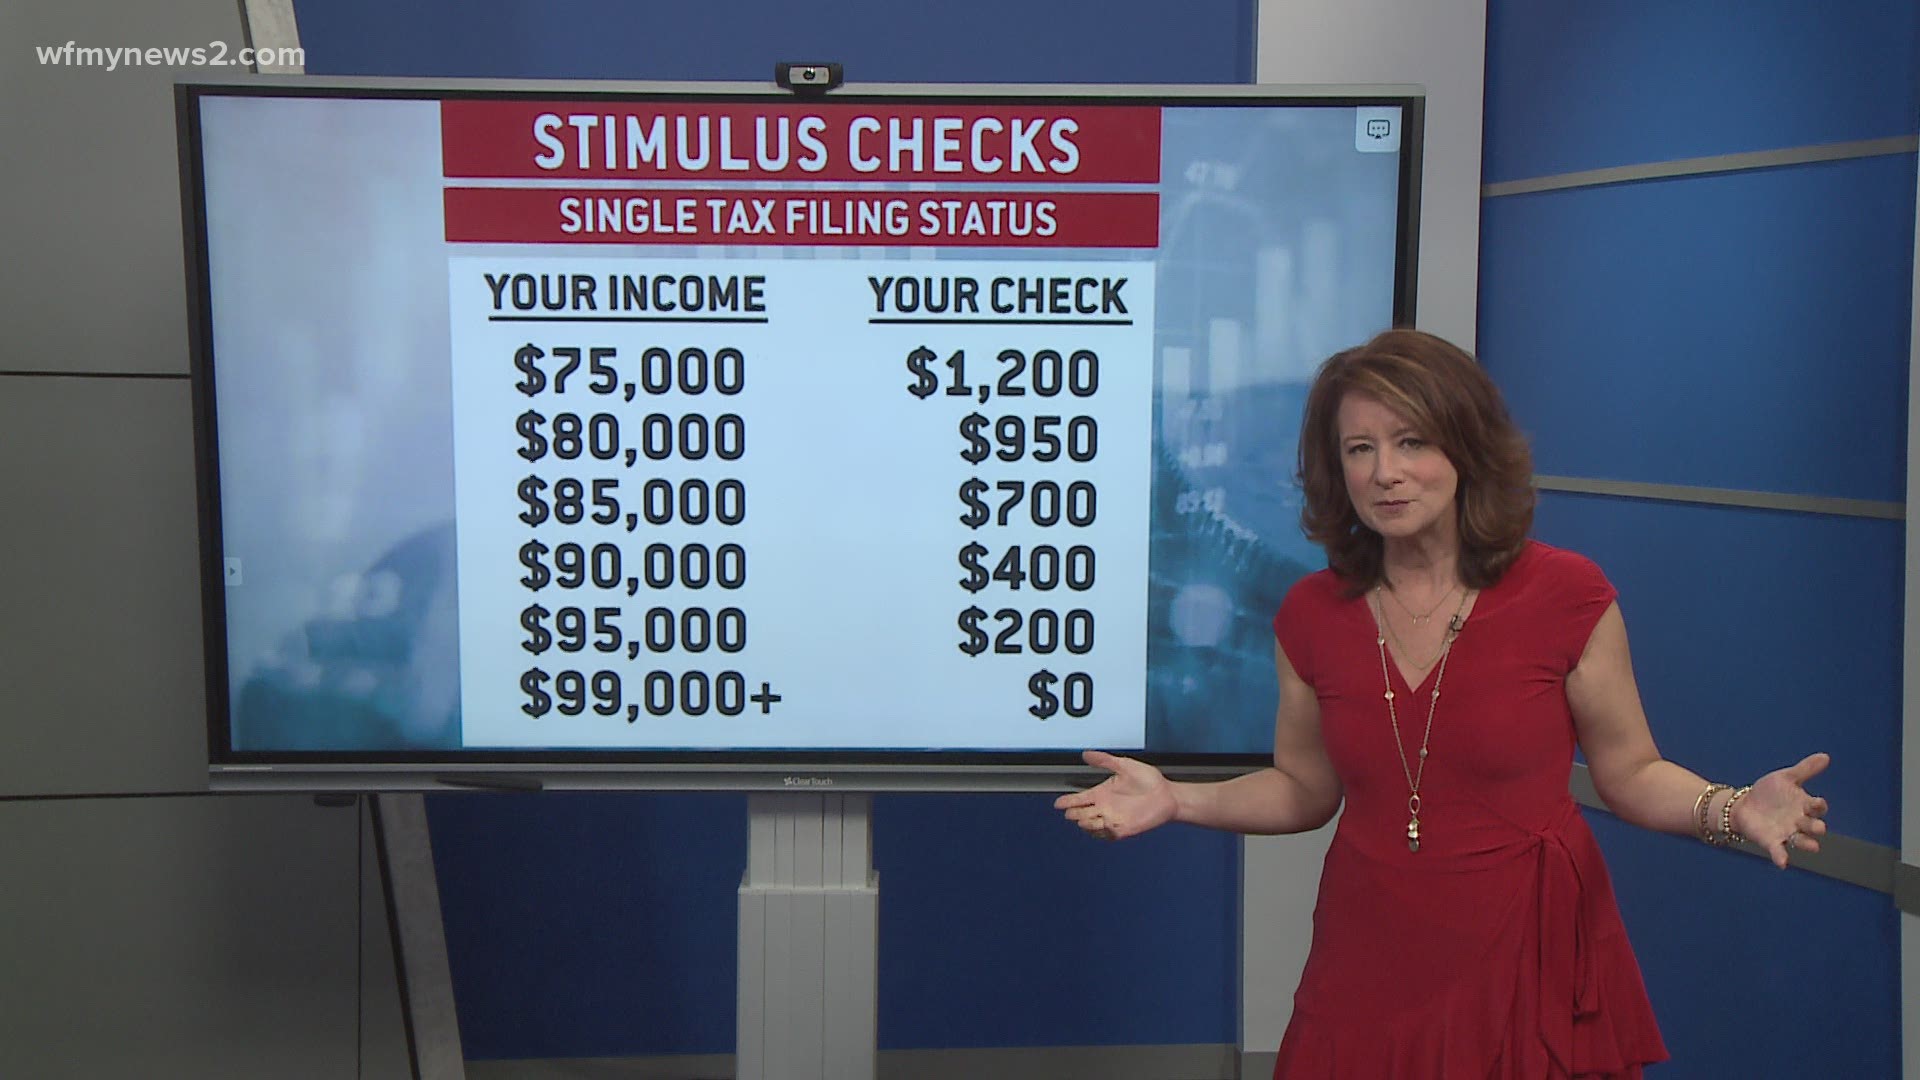 The IRS uses your most recent tax filing to determine who gets stimulus checks. So if you had a lot of changes from 2019 to 2020, you'll want to file ASAP.